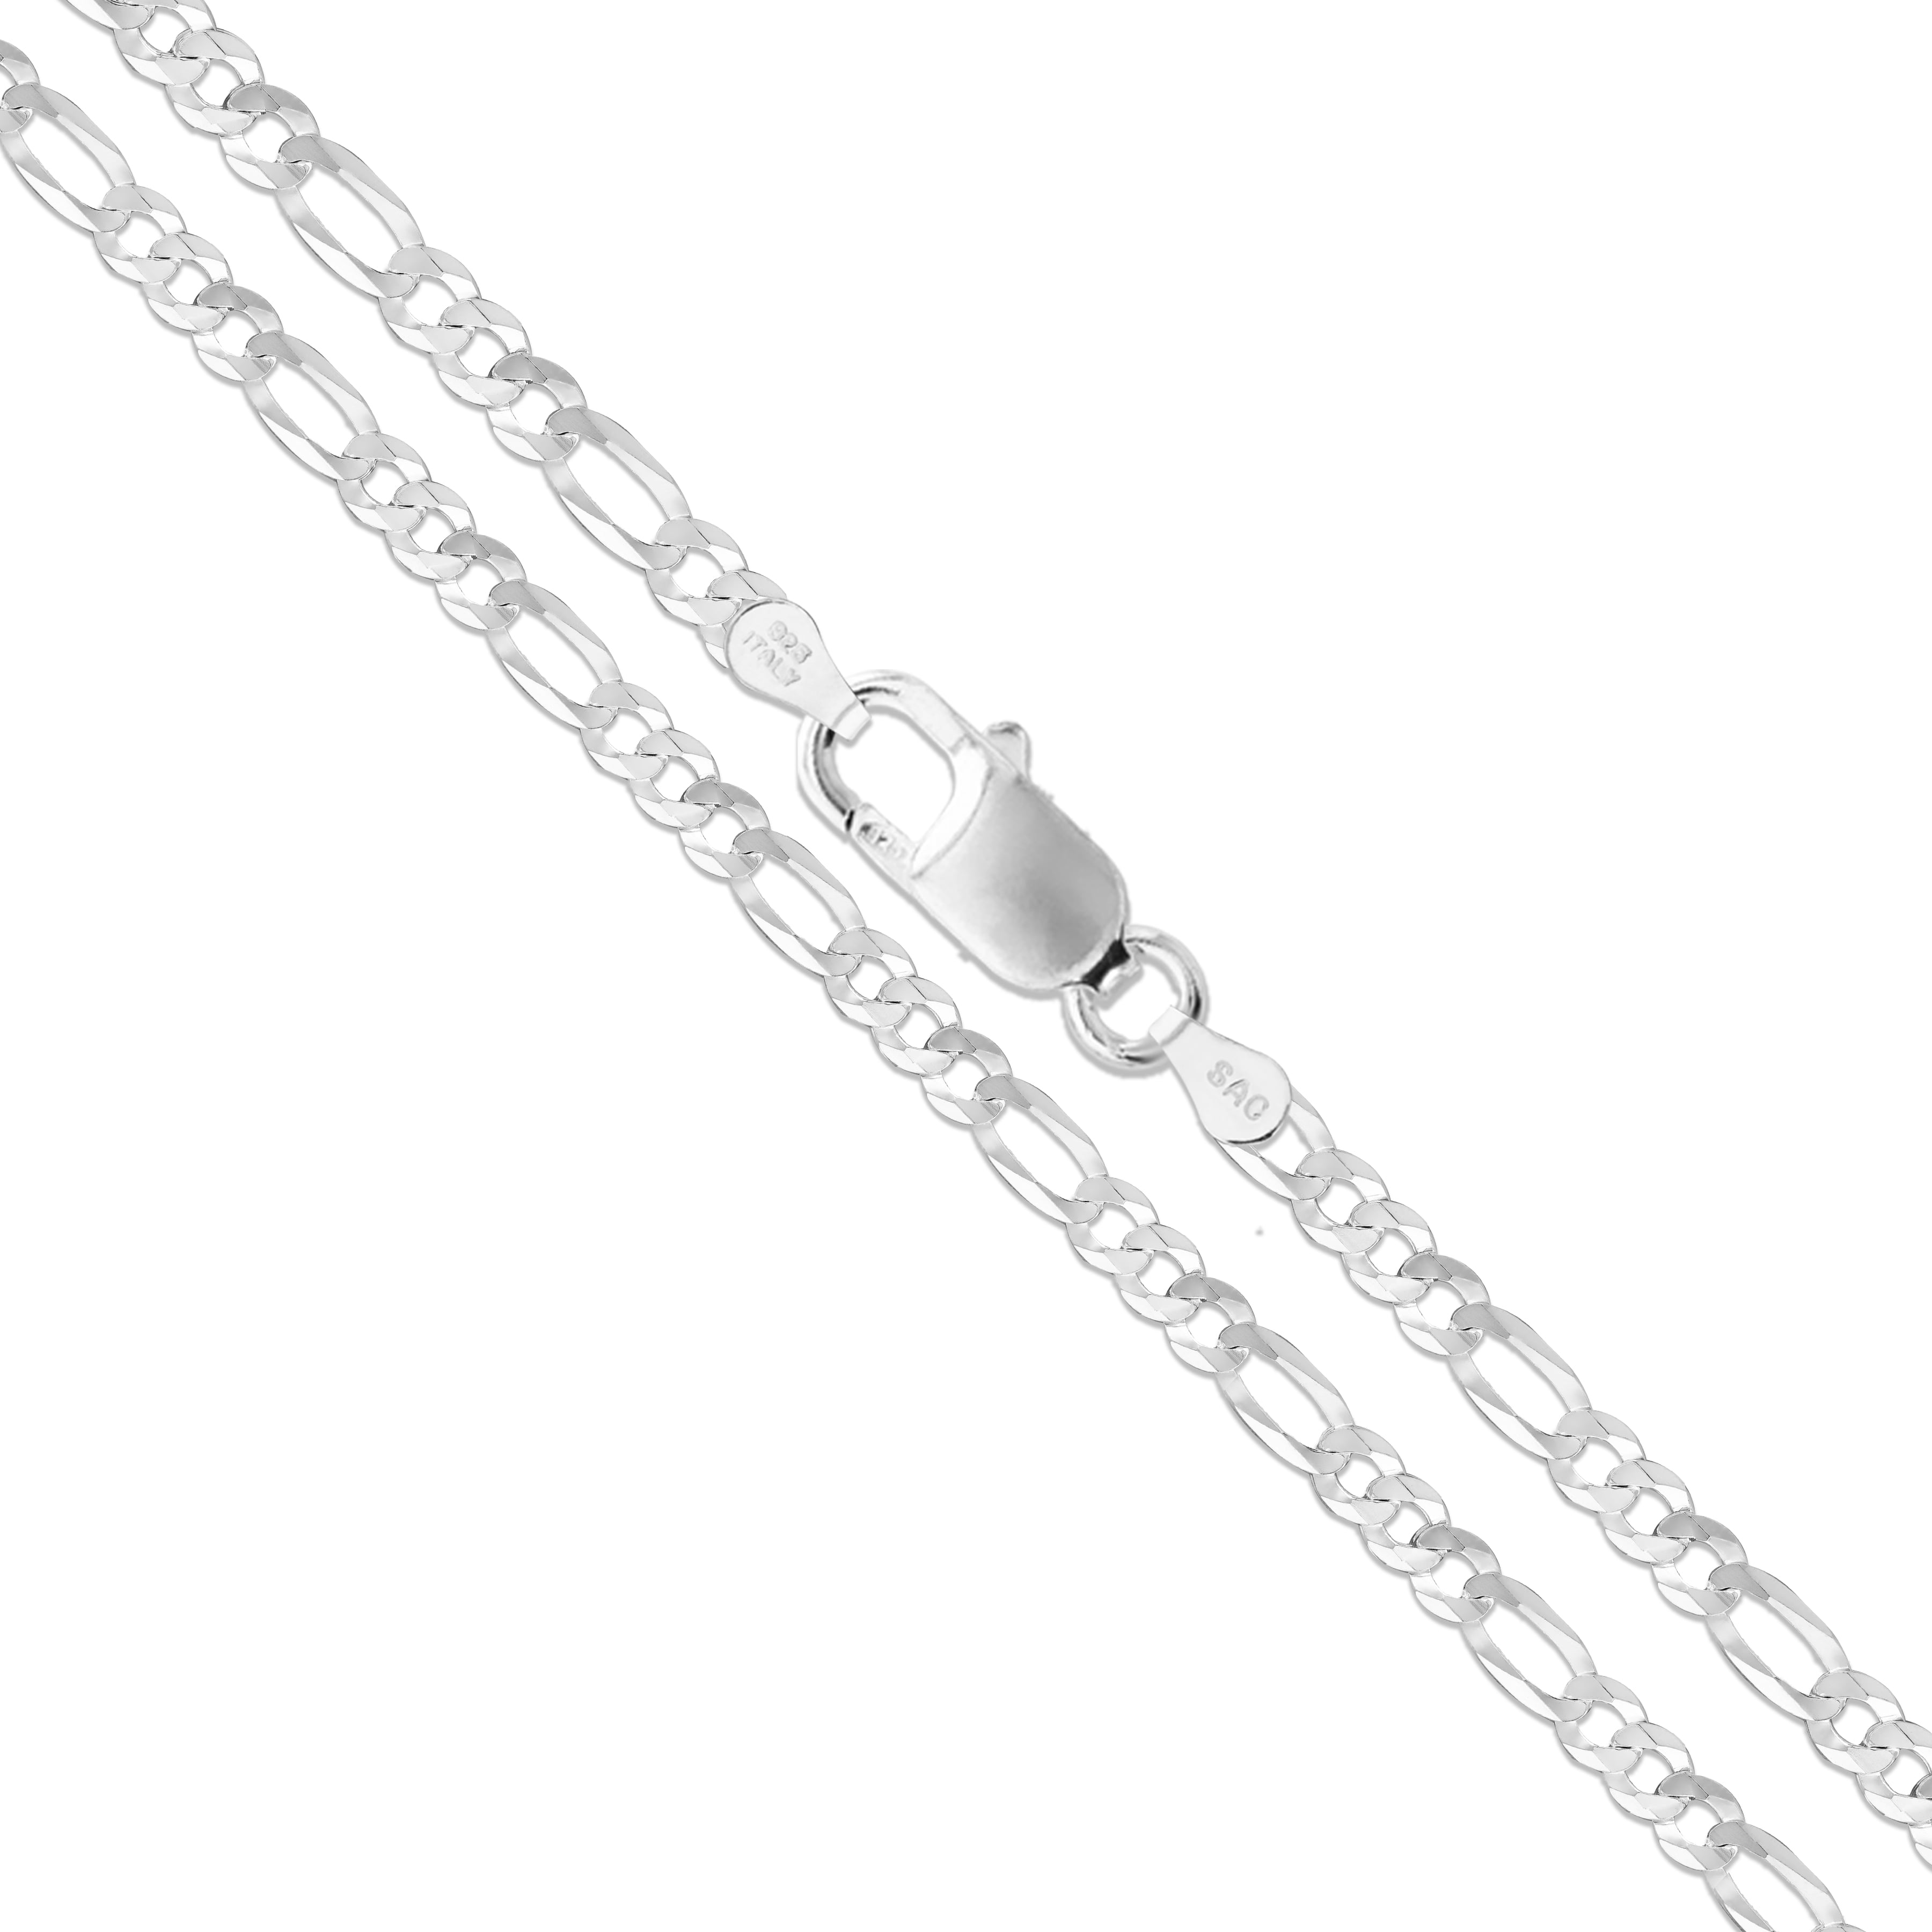 3mm wide unisex necklace ITALY solid 925 sterling silver FIGARO chain